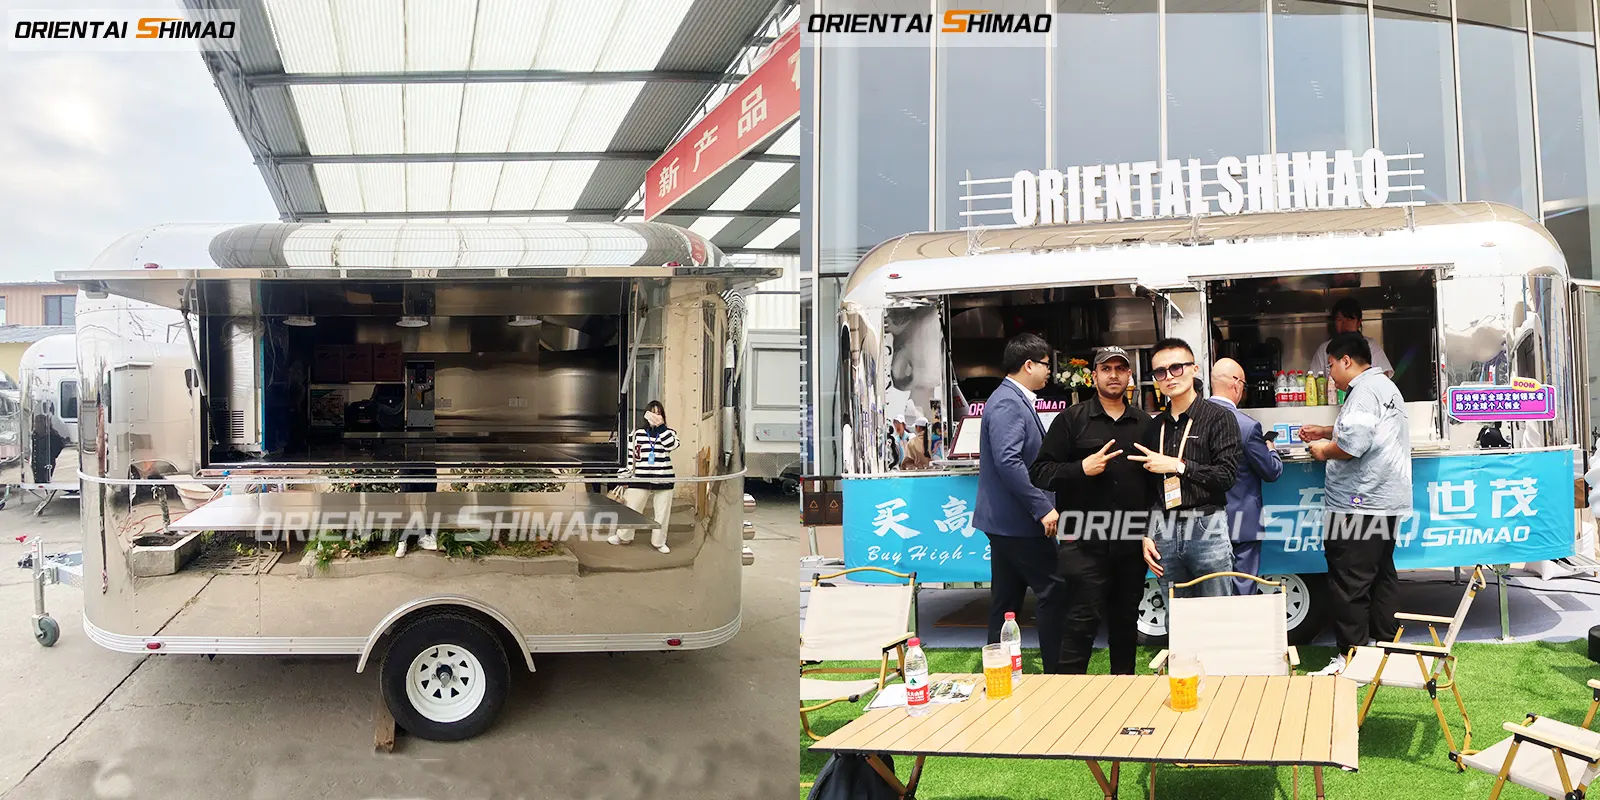 Small Stainless Steel Food Trailer Or Big Stainless Steel Food Trailer？